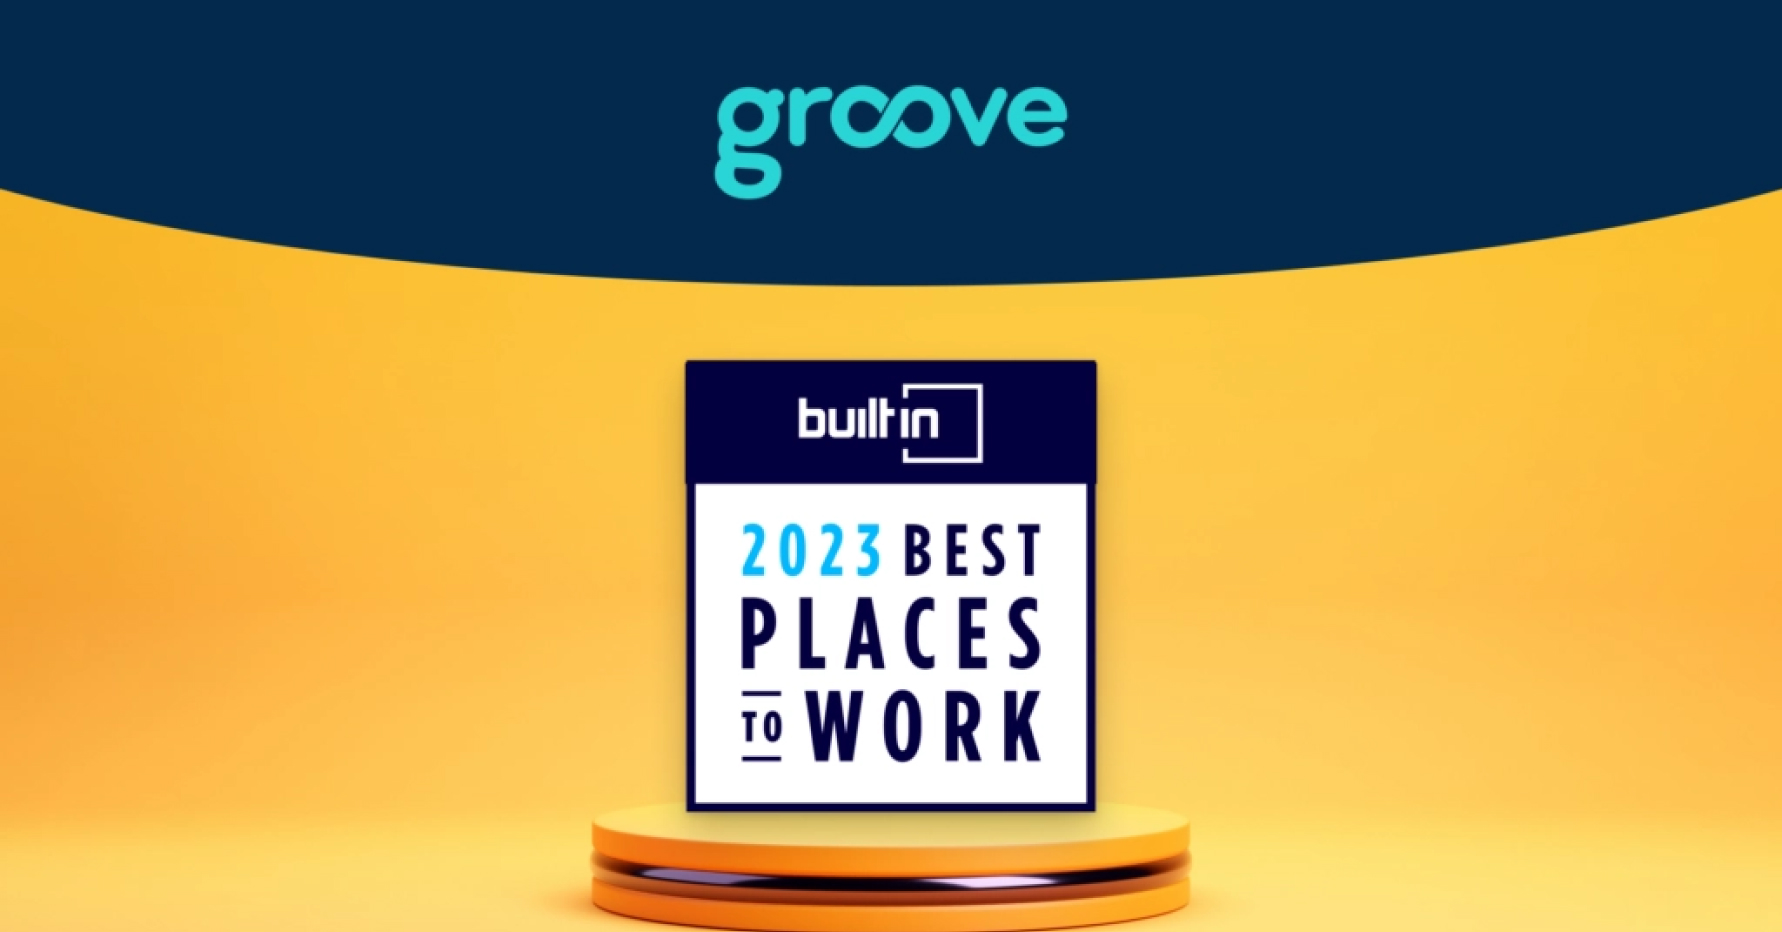 Banner image with Built In 2023 Best Places to Work award image